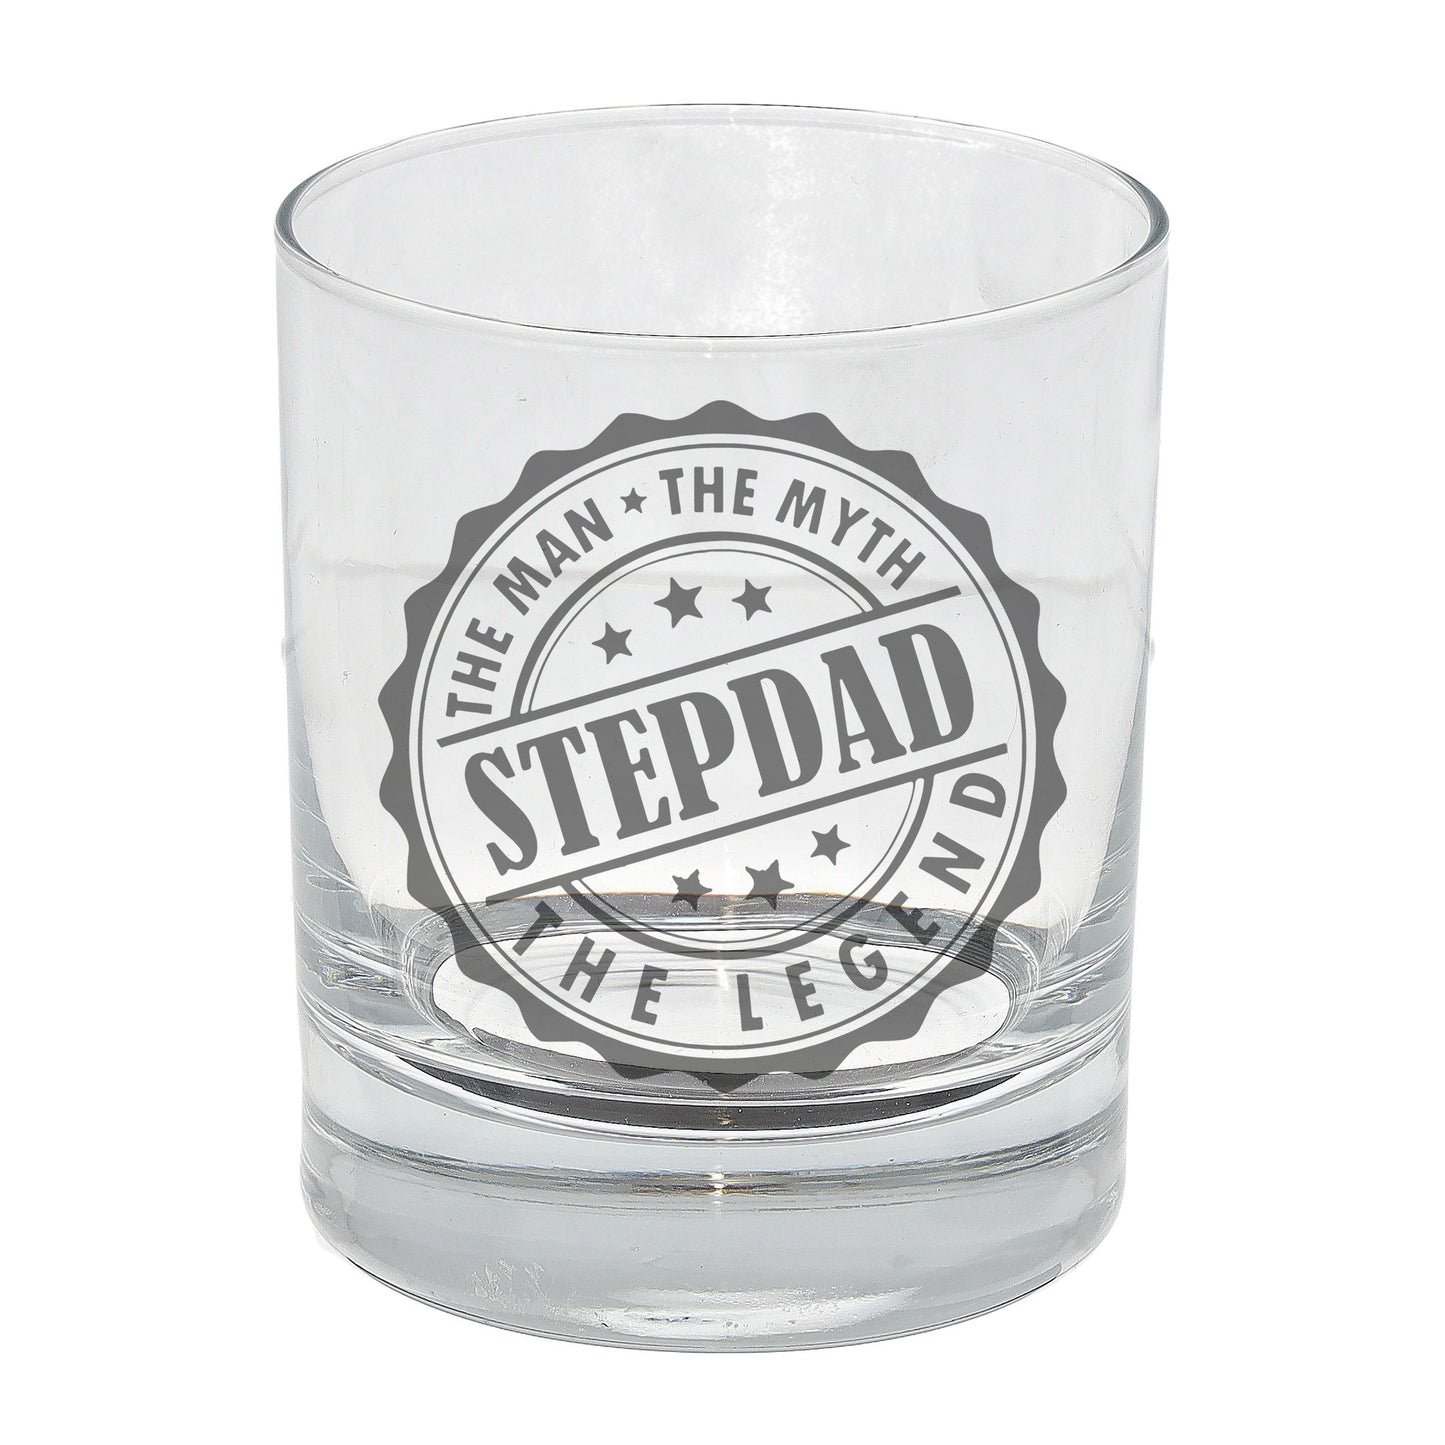 Man Myth Legend Step Dad Engraved Whisky Glass and/or Coaster Set  - Always Looking Good - Whisky Glass Only  